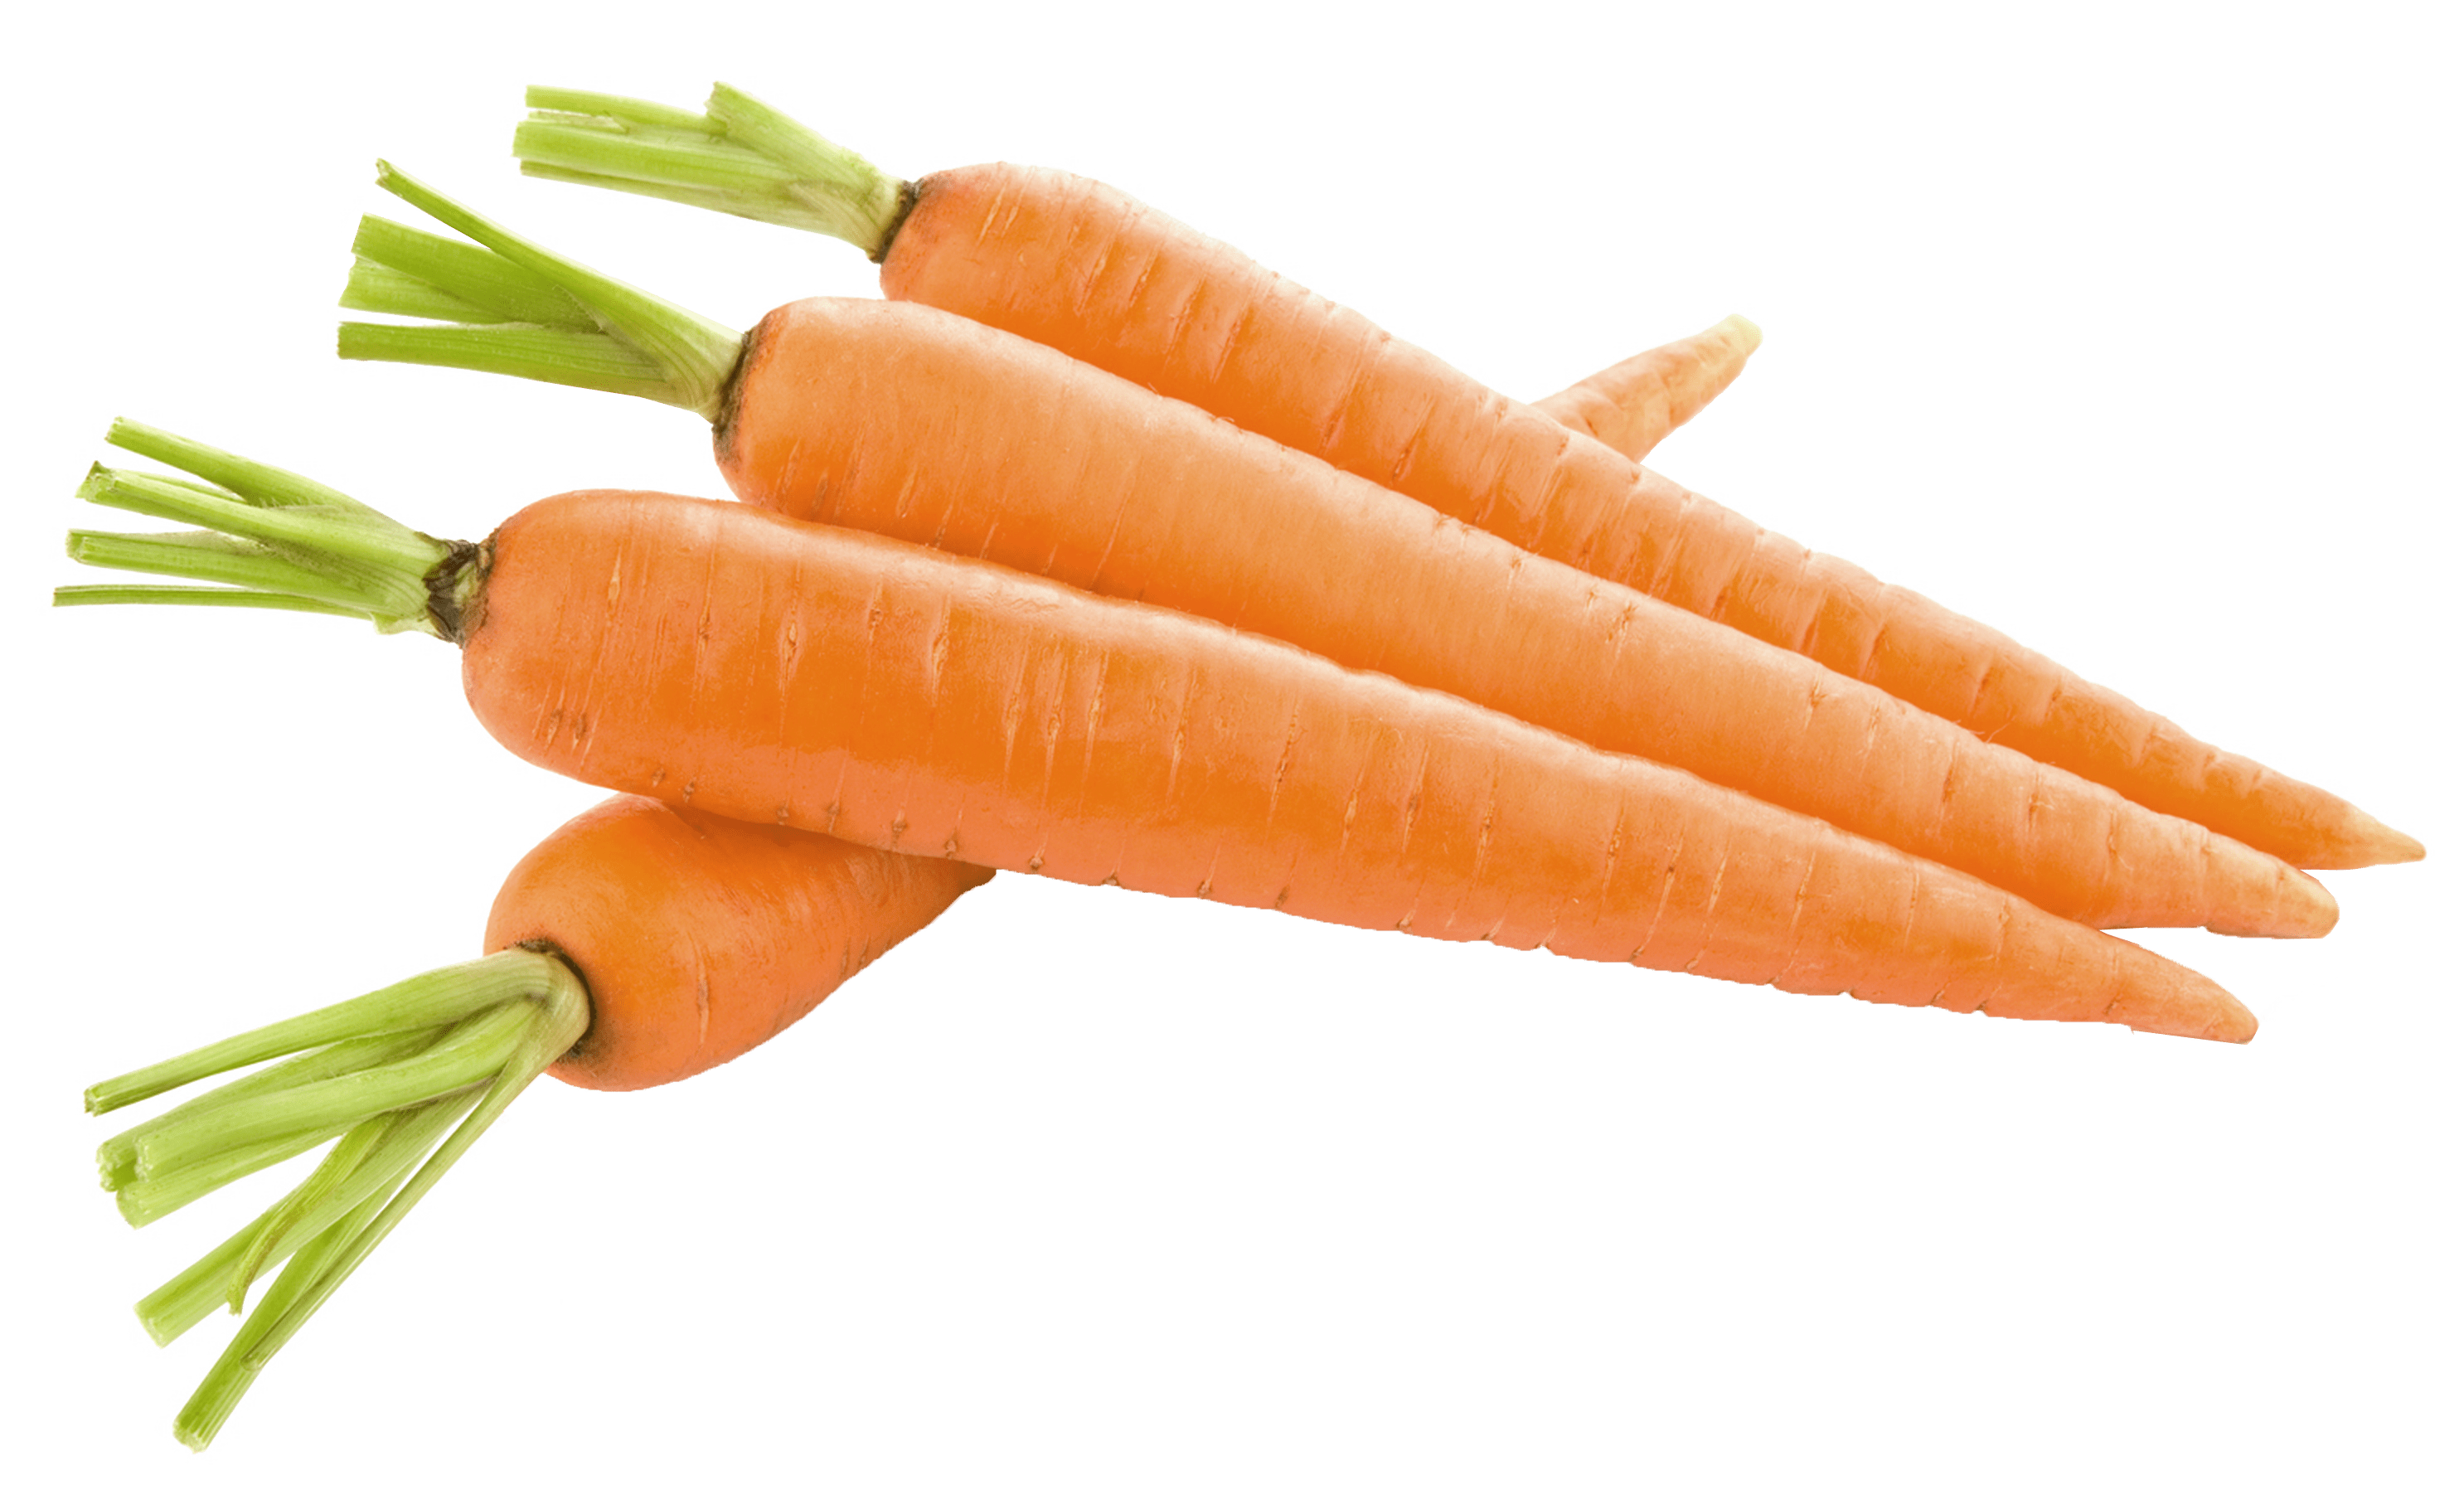 Carrots Helping Eyesight? SiOWfa15 Science in Our World Certainty